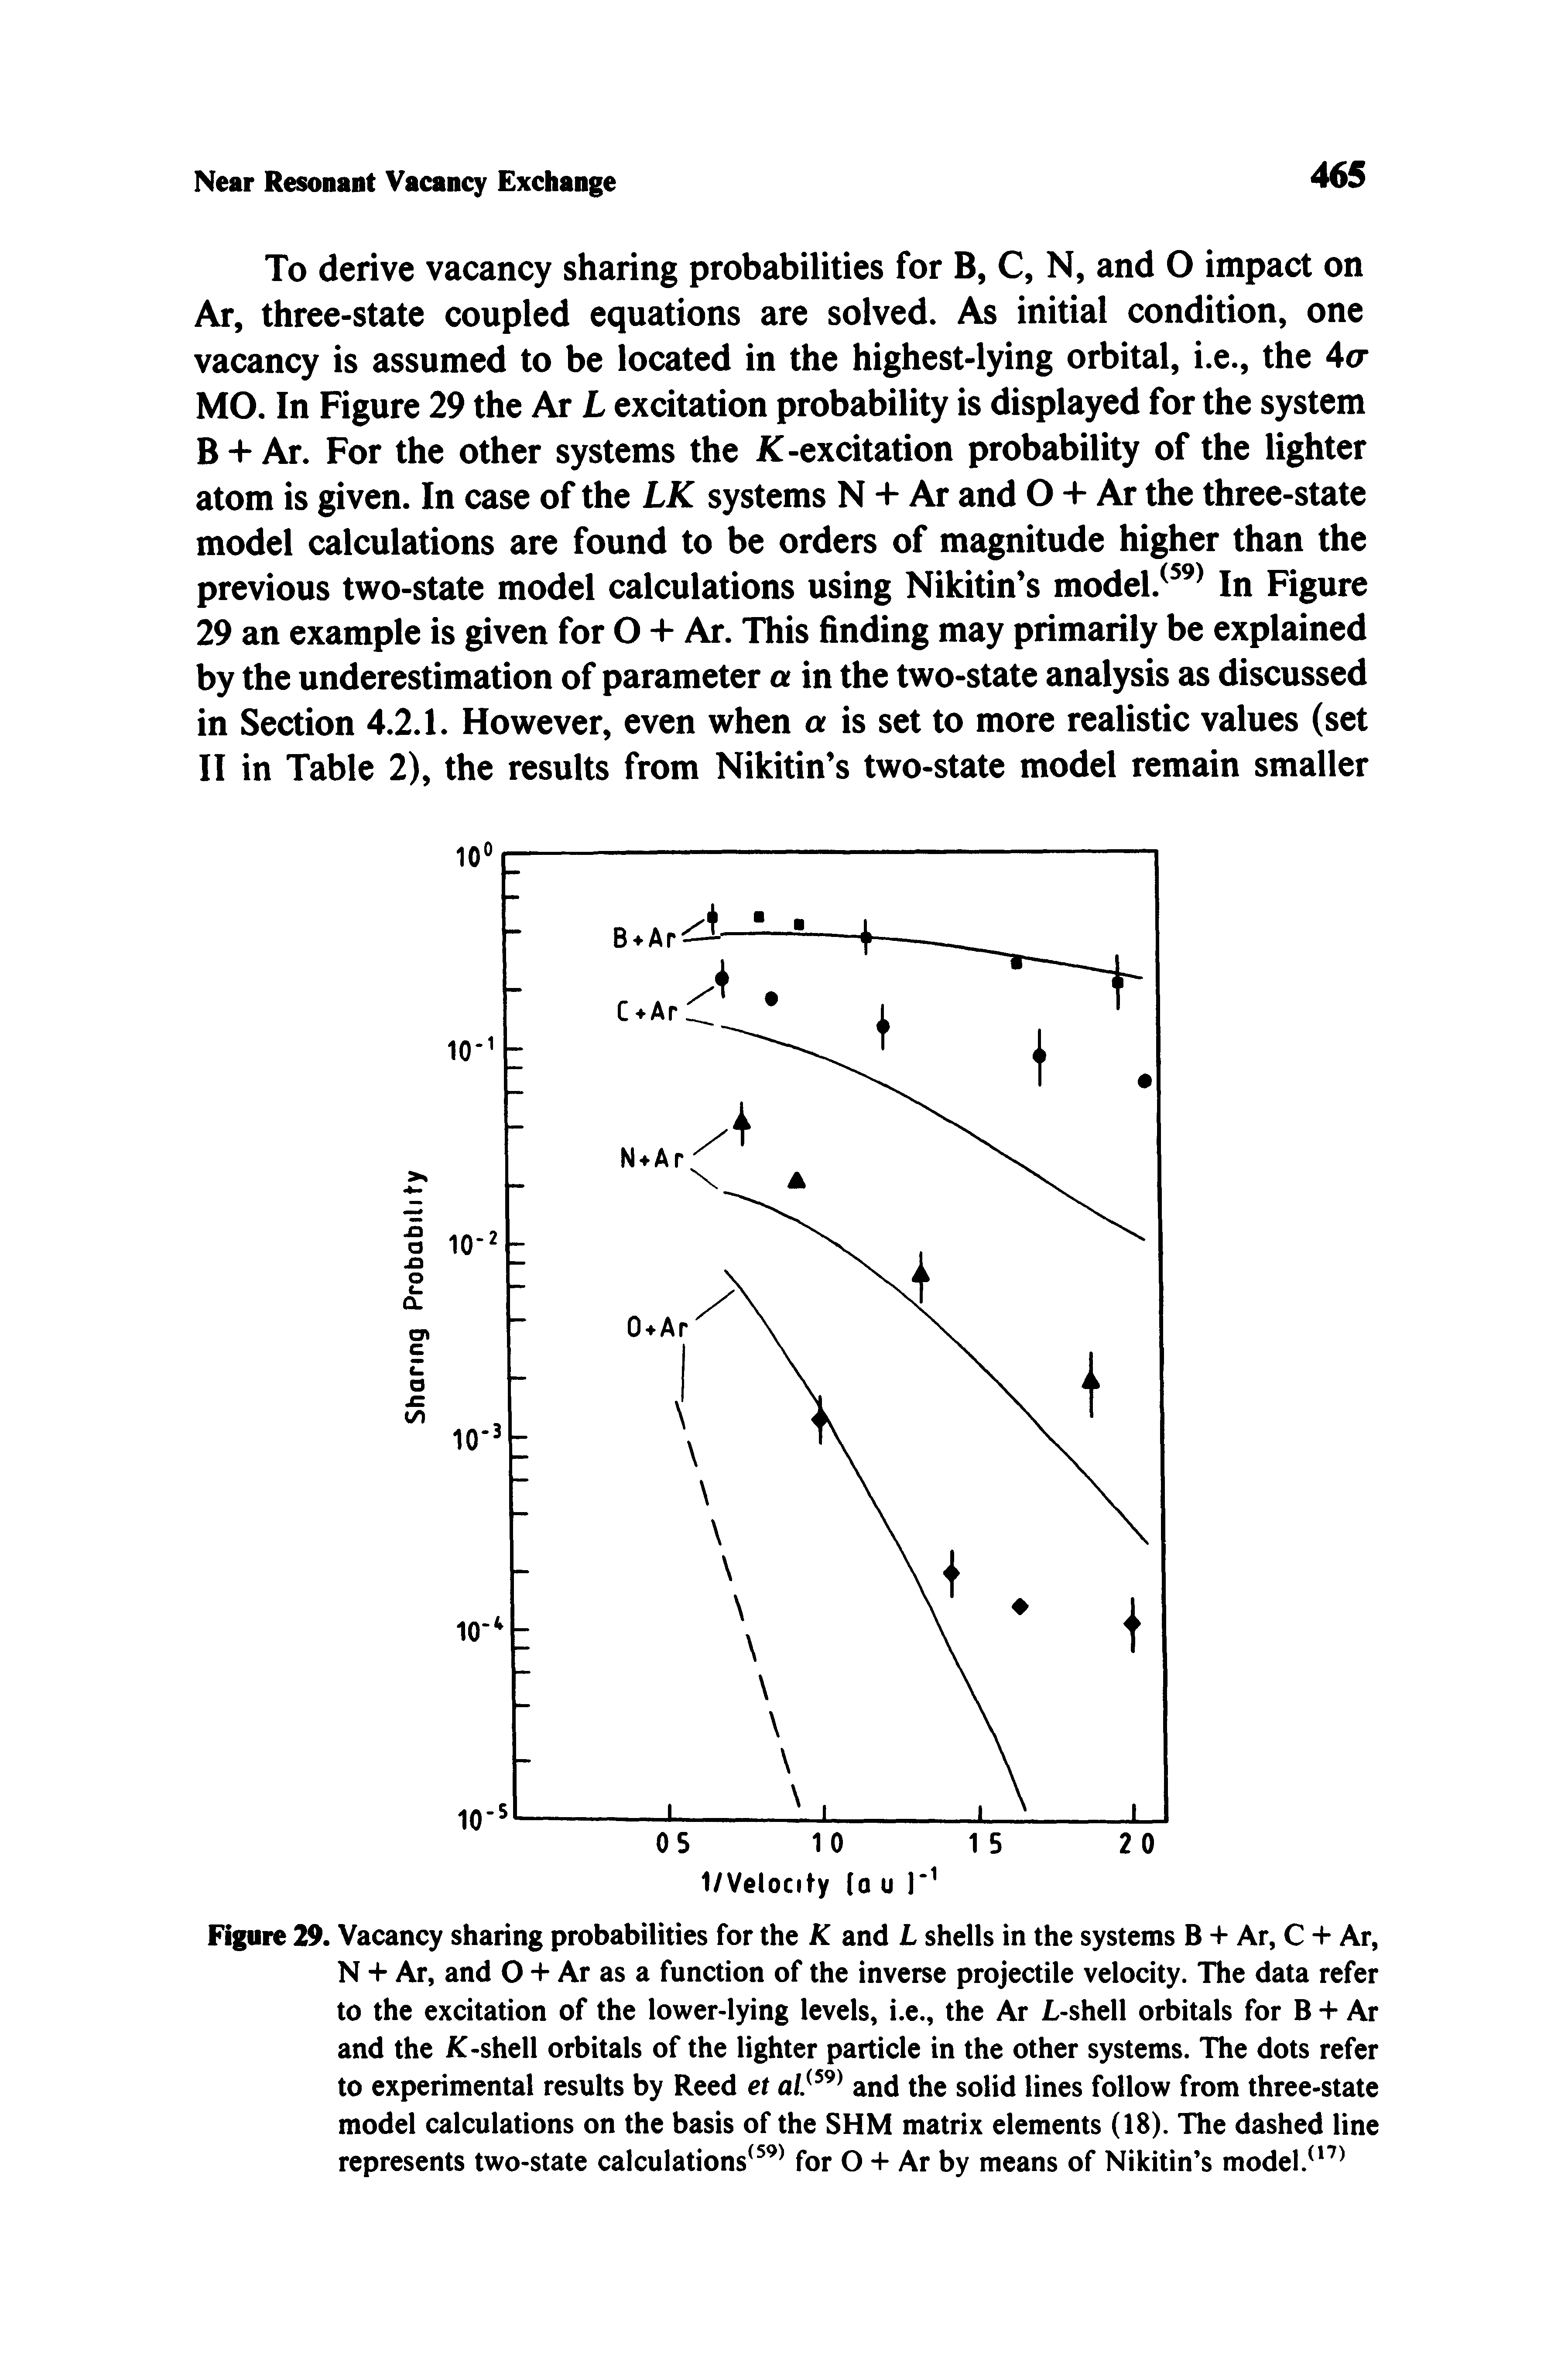 Figure 29. Vacancy sharing probabilities for the K and L shells in the systems B + Ar, C + Ar, N + Ar, and O + Ar as a function of the inverse projectile velocity. The data refer to the excitation of the lower-lying levels, i.e., the Ar i-shell orbitals for B -I- Ar and the K-shell orbitals of the lighter particle in the other systems. The dots refer to experimental results by Reed et al and the solid lines follow from three-state model calculations on the basis of the SHM matrix elements (18). The dashed line represents two-state calculations for O H- Ar by means of Nikitin s model." ...